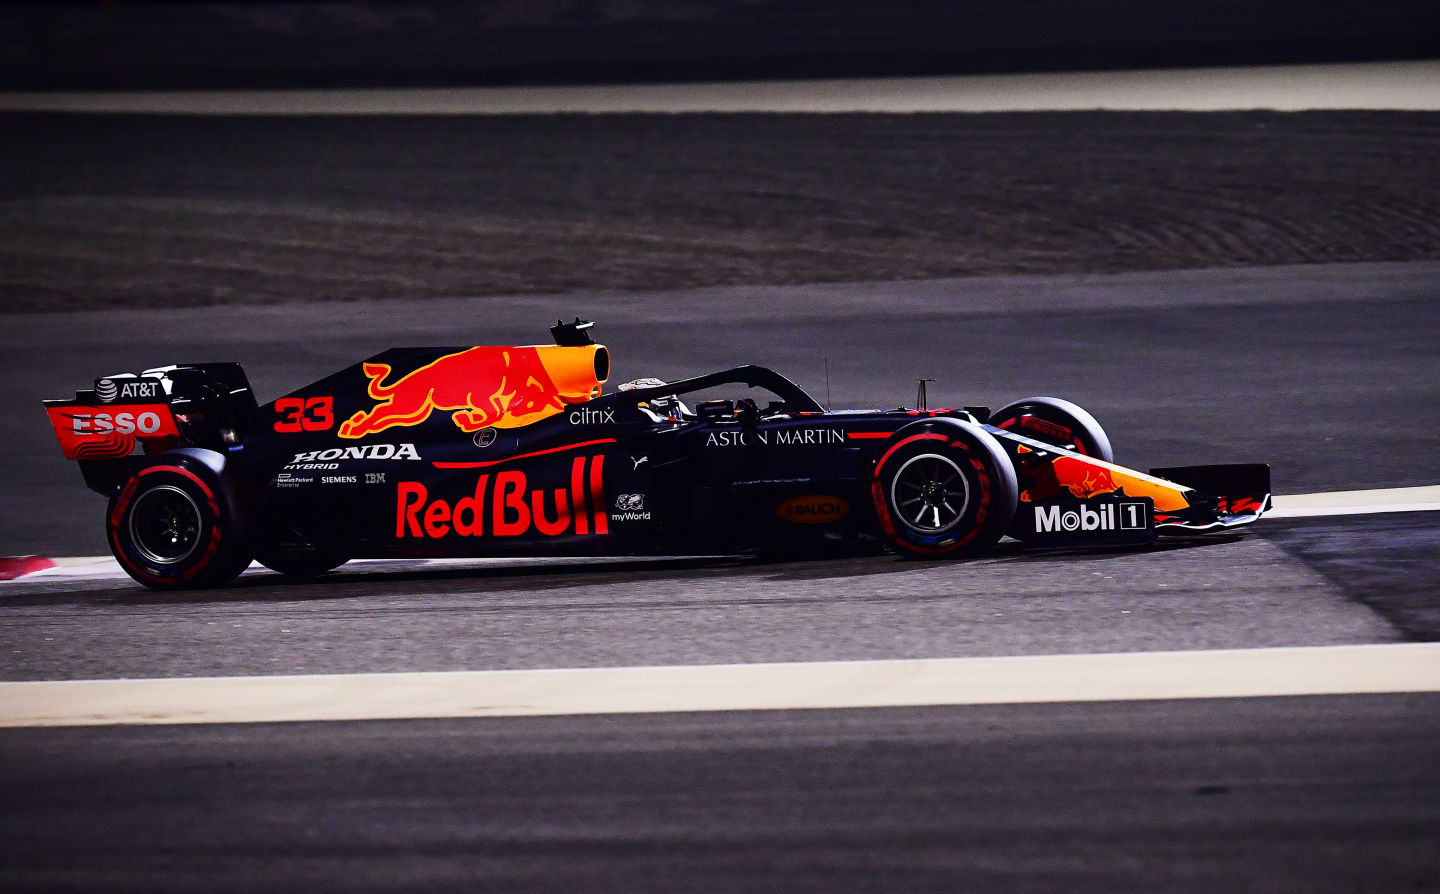 BAHRAIN, BAHRAIN - DECEMBER 05: Max Verstappen of the Netherlands driving the (33) Aston Martin Red Bull Racing RB16 on track during qualifying ahead of the F1 Grand Prix of Sakhir at Bahrain International Circuit on December 05, 2020 in Bahrain, Bahrain. (Photo by Giuseppe Cacace - Pool/Getty Images)